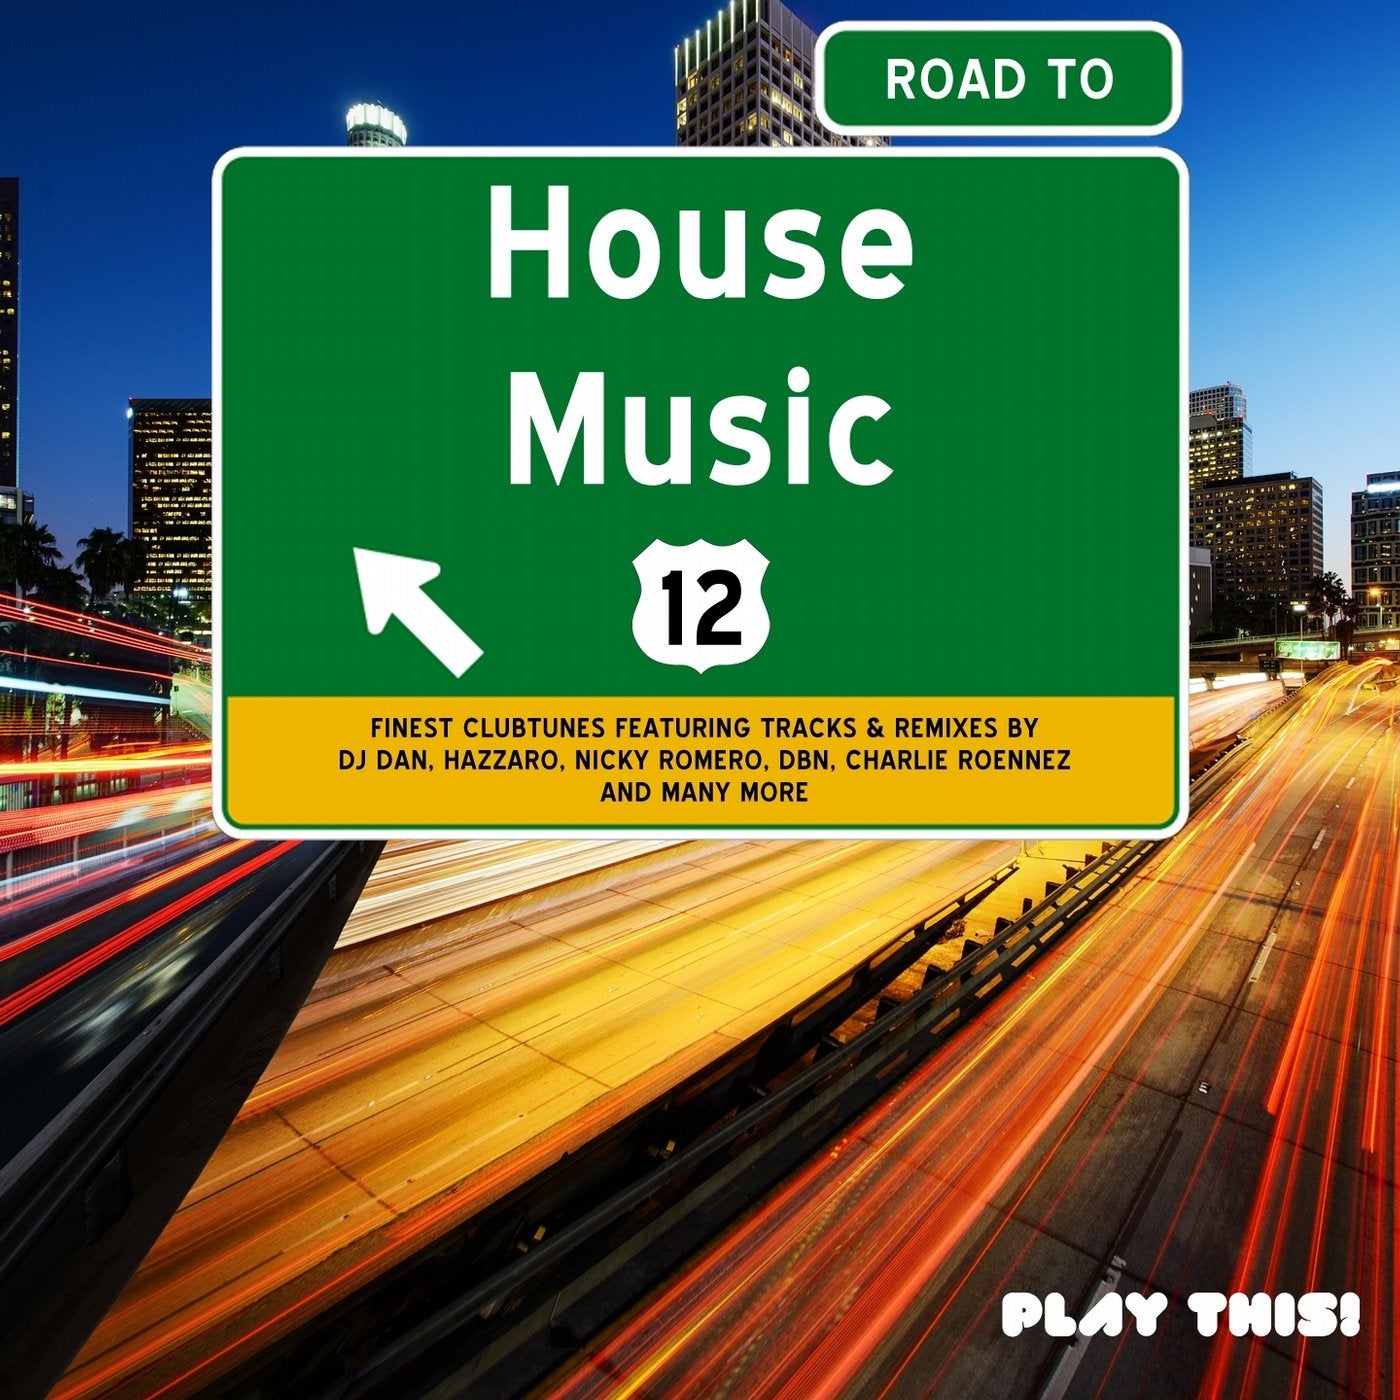 Road to House Music, Vol. 12